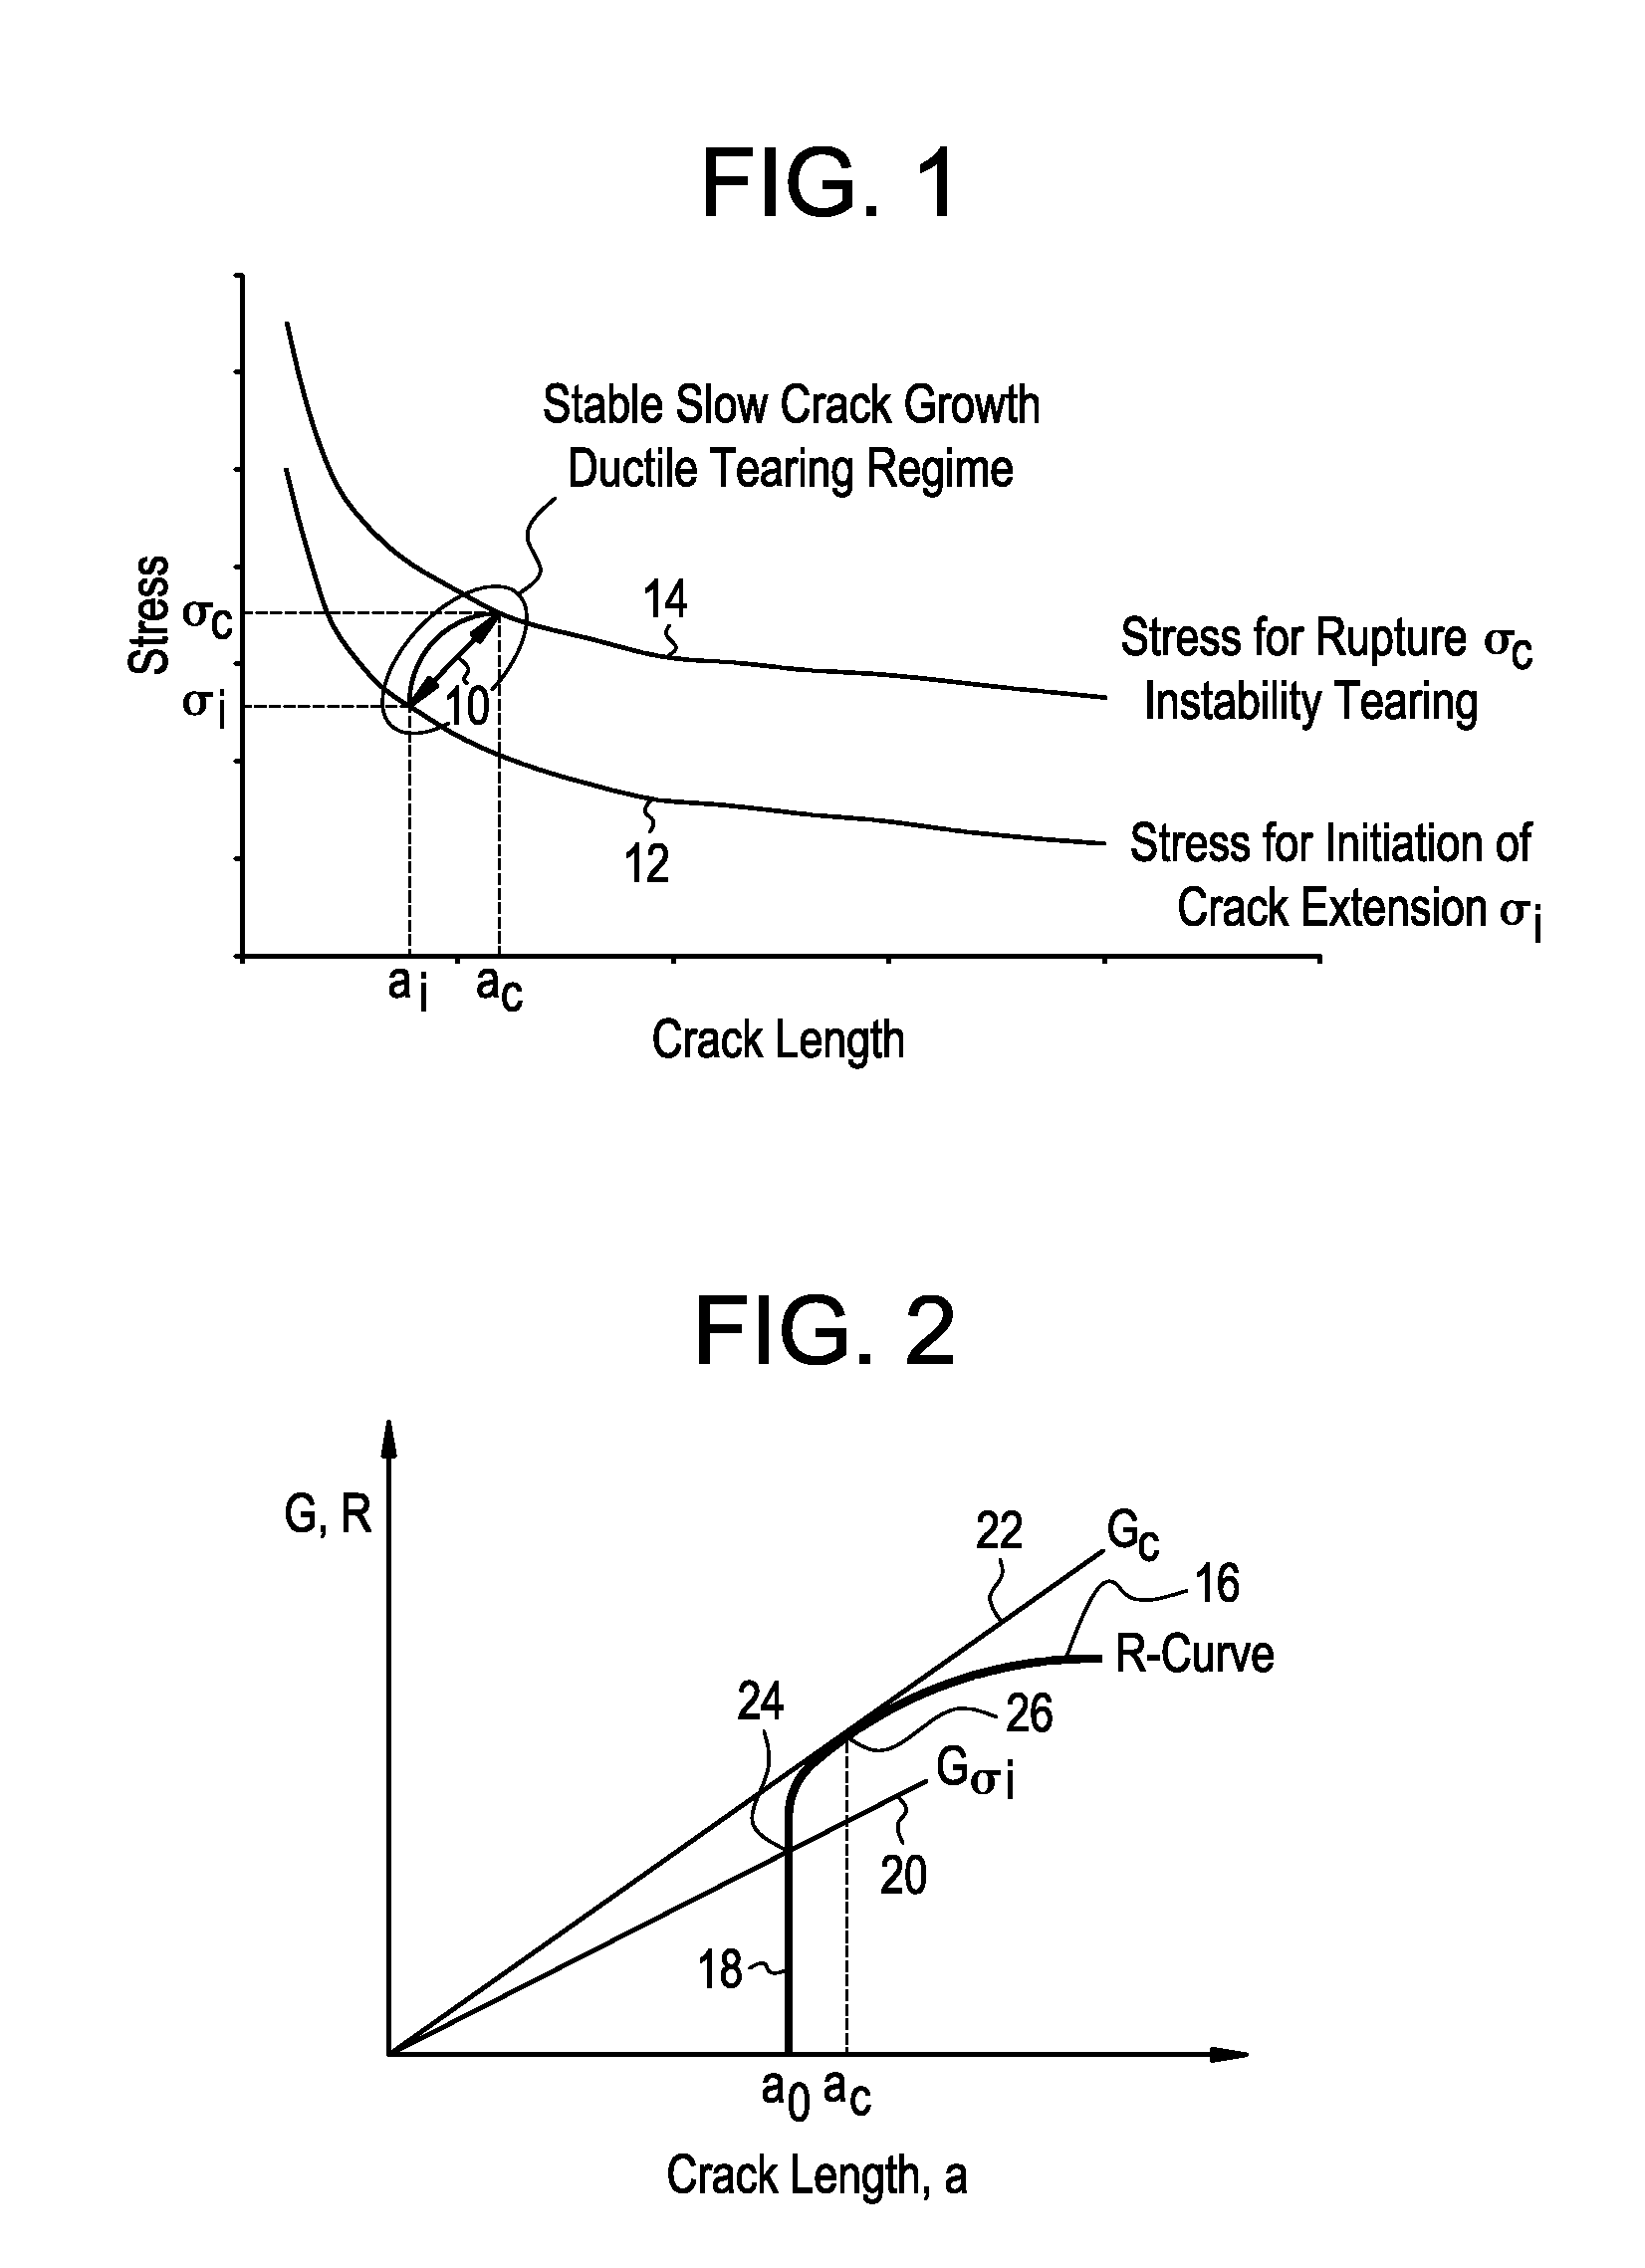 Method for detecting leak before rupture in a pipeline